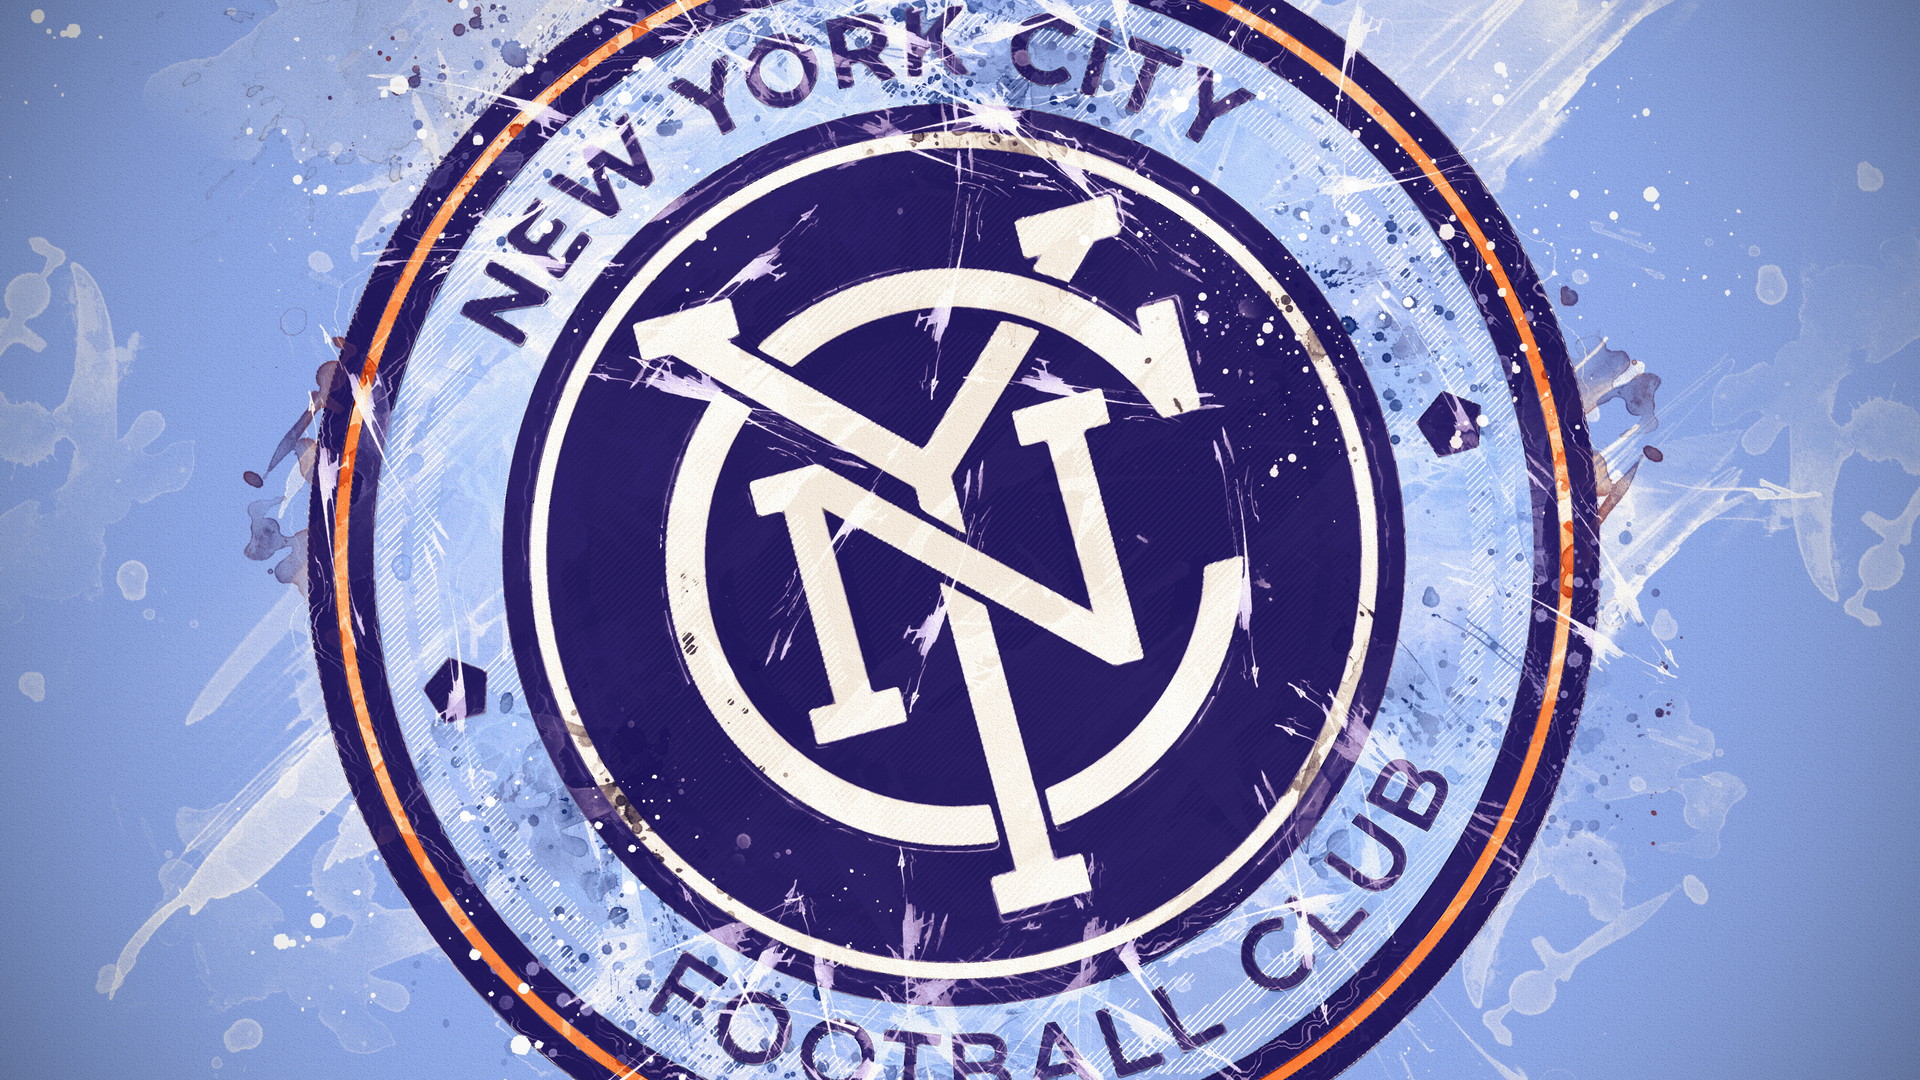 Best New York City FC Desktop Wallpapers With high-resolution 1920X1080 pixel. You can use this wallpaper for your Desktop Computers, Mac Screensavers, Windows Backgrounds, iPhone Wallpapers, Tablet or Android Lock screen and another Mobile device